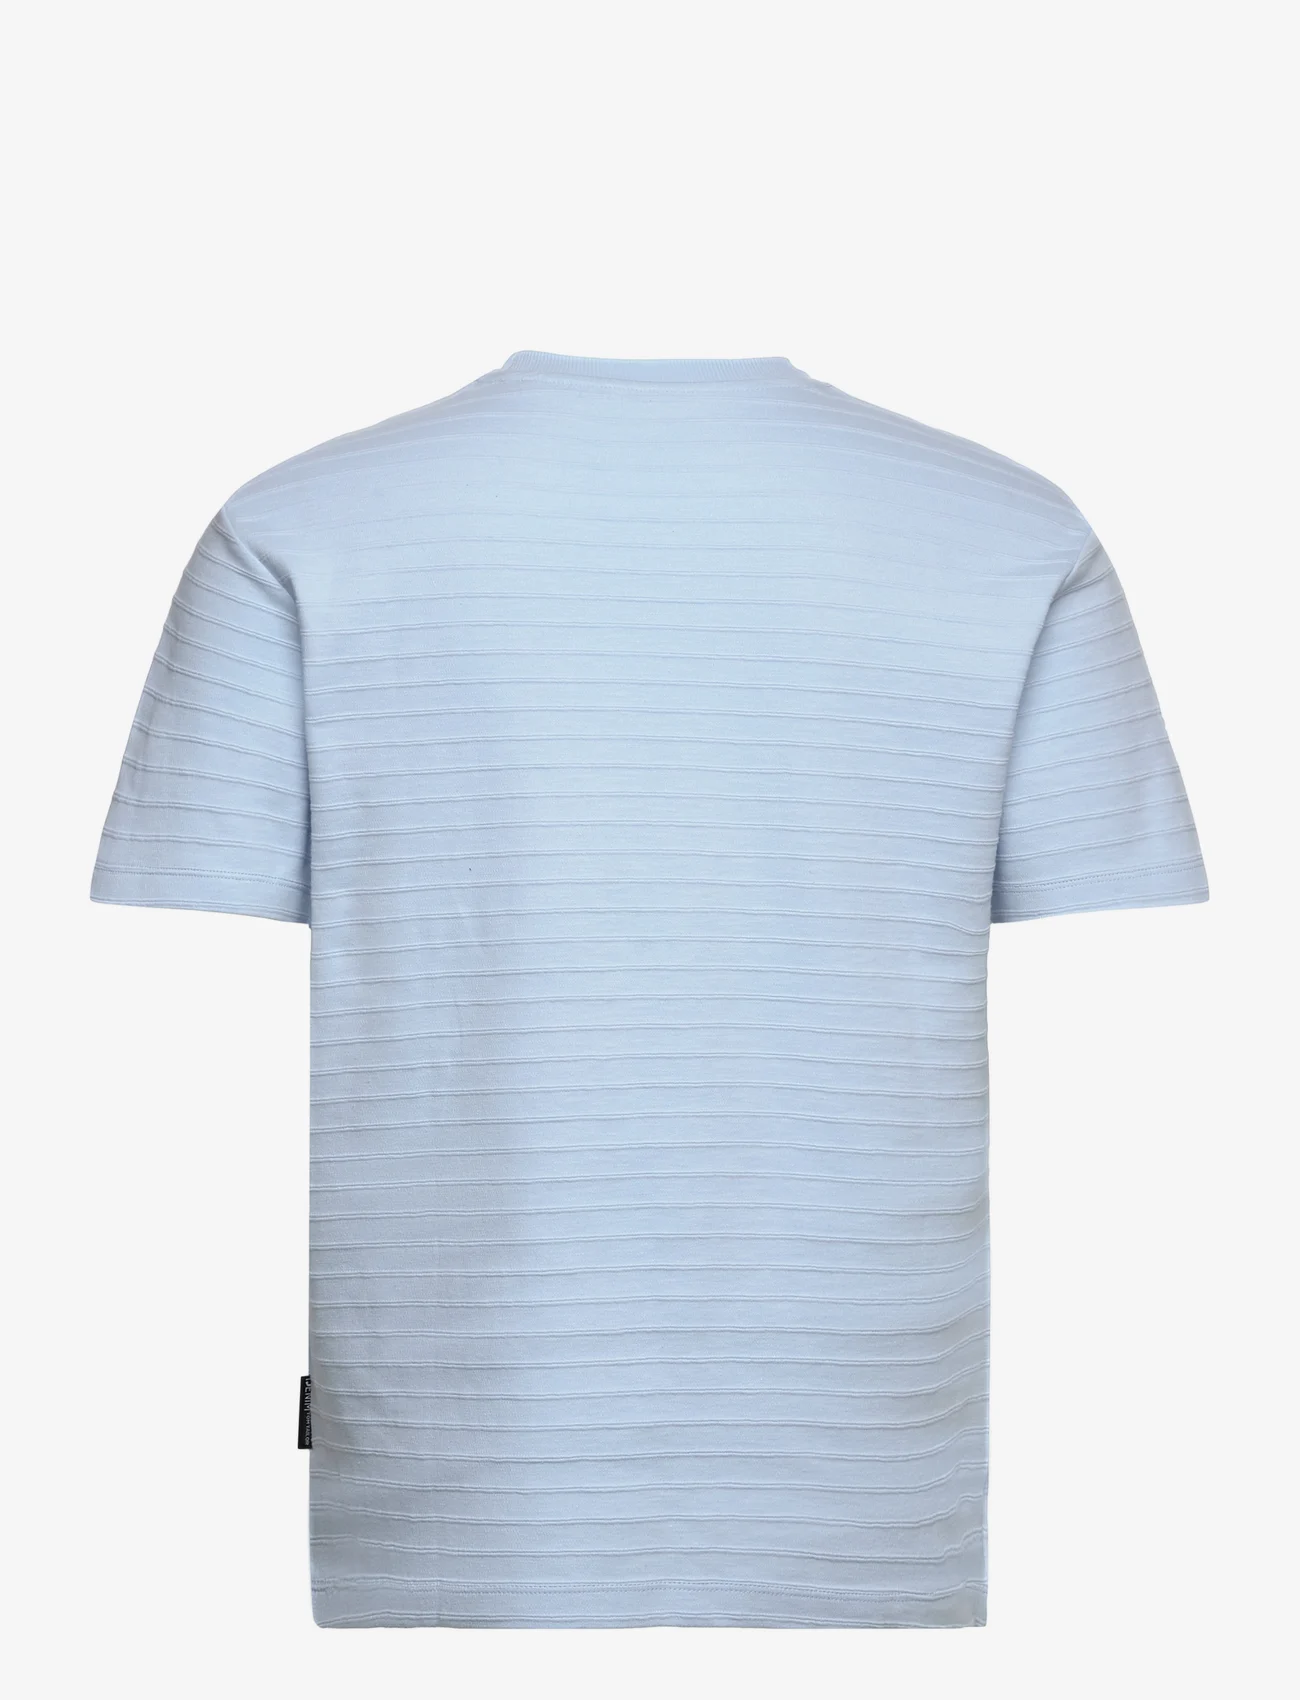 Tom Tailor - relaxed structured t-shirt - laveste priser - middle sky blue - 1